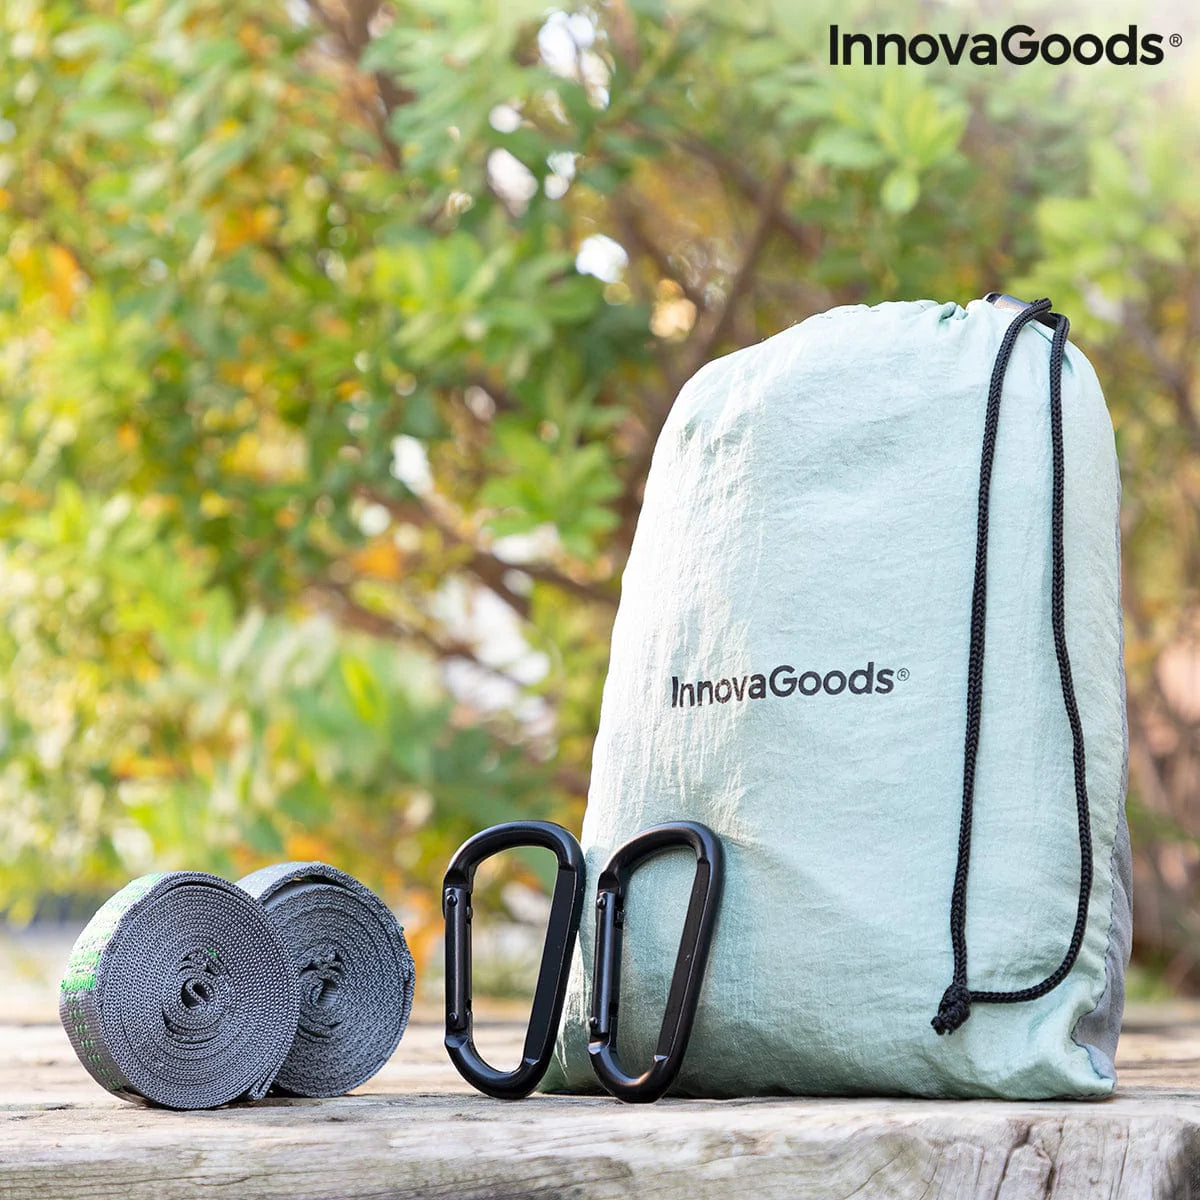 InnovaGoods Sport | Fitness > Camping und Berge > Camping- und Bergzubehör Doppelte Camping-Hängematte Rewong InnovaGoods